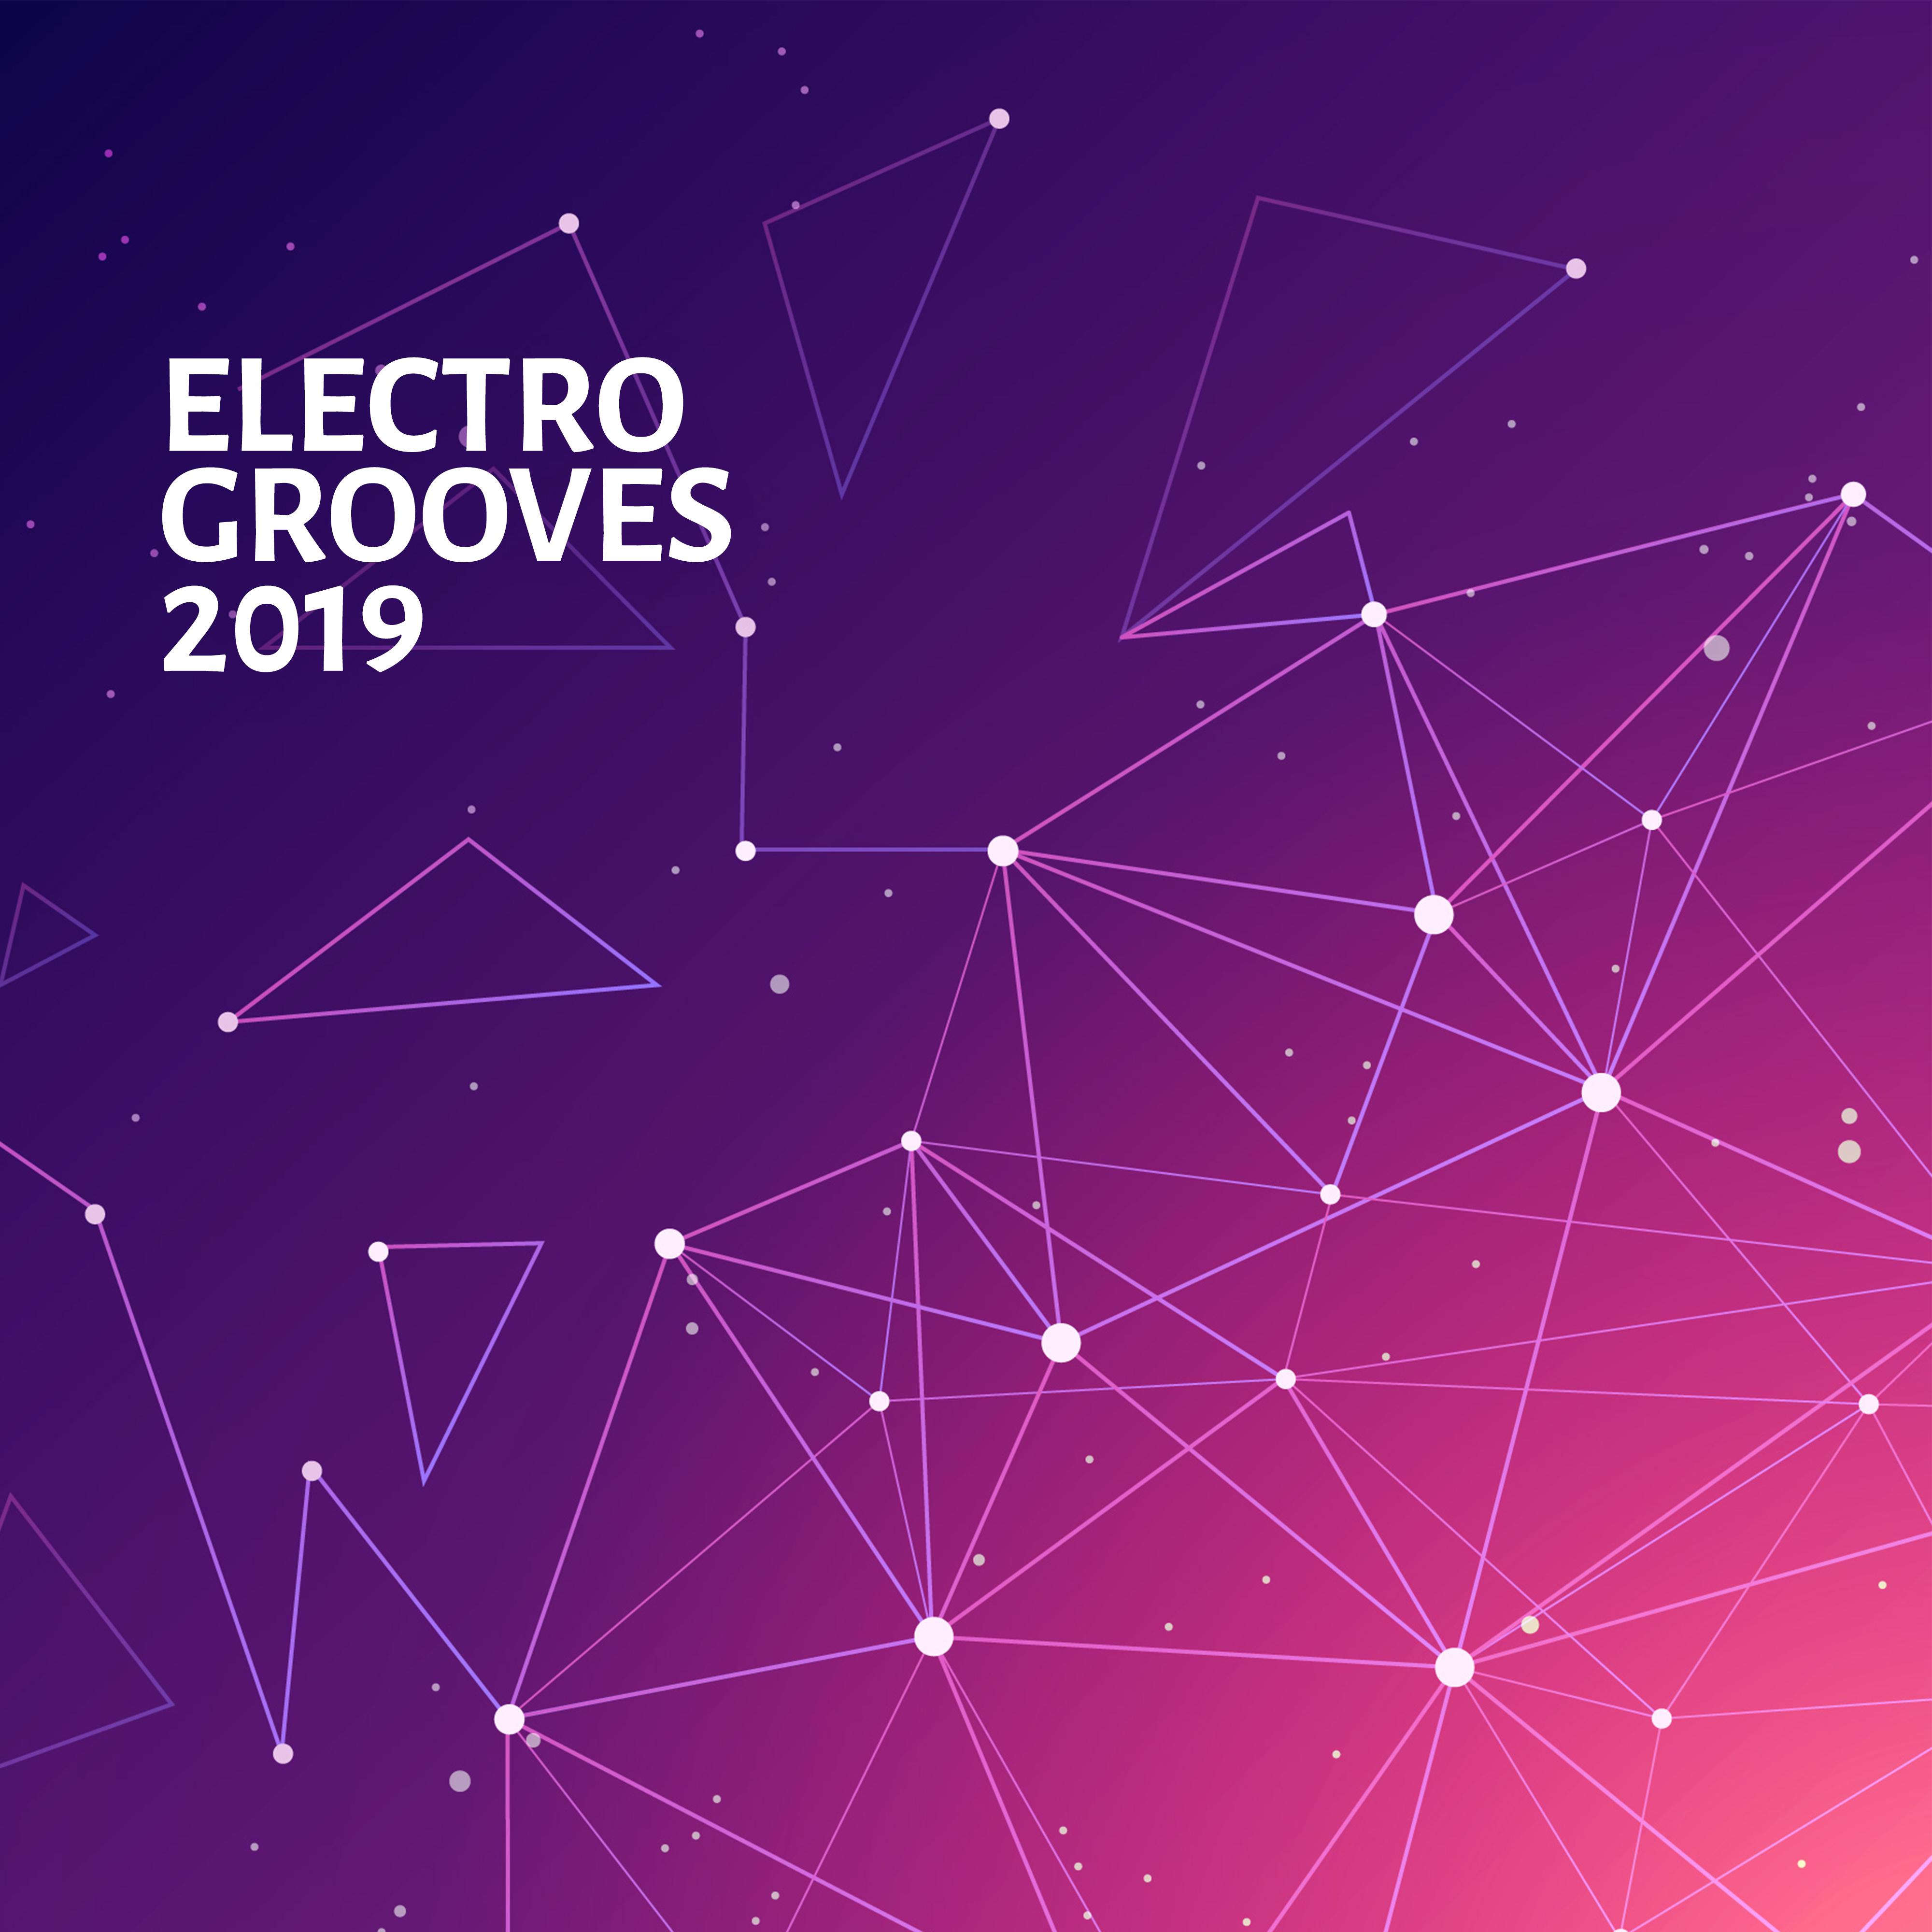 Electro Grooves 2019